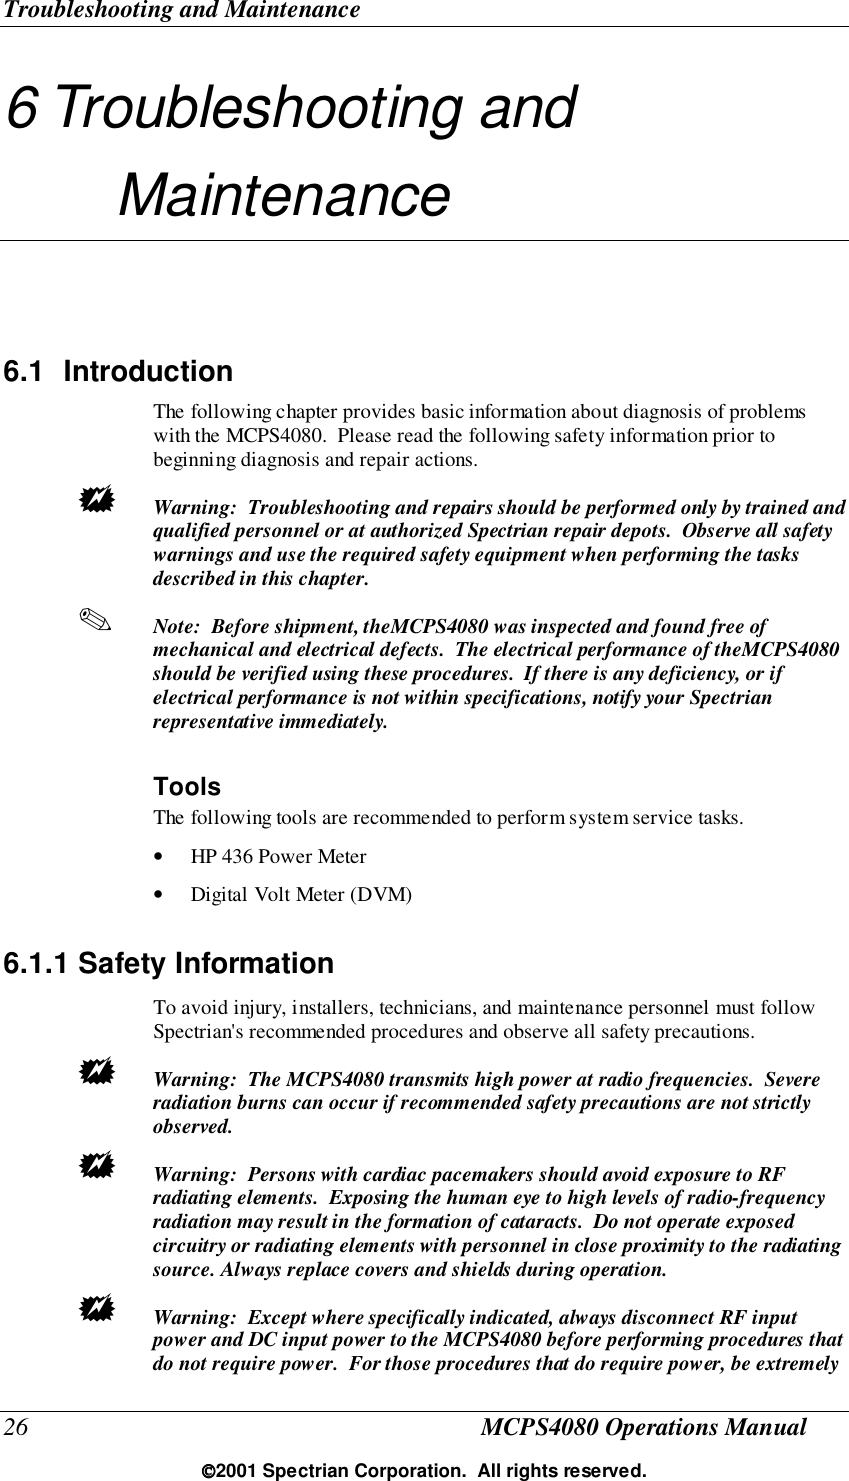 Troubleshooting and Maintenance26 MCPS4080 Operations Manual2001 Spectrian Corporation.  All rights reserved.6 Troubleshooting andMaintenance6.1 IntroductionThe following chapter provides basic information about diagnosis of problemswith the MCPS4080.  Please read the following safety information prior tobeginning diagnosis and repair actions.! Warning:  Troubleshooting and repairs should be performed only by trained andqualified personnel or at authorized Spectrian repair depots.  Observe all safetywarnings and use the required safety equipment when performing the tasksdescribed in this chapter.✎ Note:  Before shipment, theMCPS4080 was inspected and found free ofmechanical and electrical defects.  The electrical performance of theMCPS4080should be verified using these procedures.  If there is any deficiency, or ifelectrical performance is not within specifications, notify your Spectrianrepresentative immediately.ToolsThe following tools are recommended to perform system service tasks.• HP 436 Power Meter• Digital Volt Meter (DVM)6.1.1 Safety InformationTo avoid injury, installers, technicians, and maintenance personnel must followSpectrian&apos;s recommended procedures and observe all safety precautions.! Warning:  The MCPS4080 transmits high power at radio frequencies.  Severeradiation burns can occur if recommended safety precautions are not strictlyobserved.! Warning:  Persons with cardiac pacemakers should avoid exposure to RFradiating elements.  Exposing the human eye to high levels of radio-frequencyradiation may result in the formation of cataracts.  Do not operate exposedcircuitry or radiating elements with personnel in close proximity to the radiatingsource. Always replace covers and shields during operation.! Warning:  Except where specifically indicated, always disconnect RF inputpower and DC input power to the MCPS4080 before performing procedures thatdo not require power.  For those procedures that do require power, be extremely